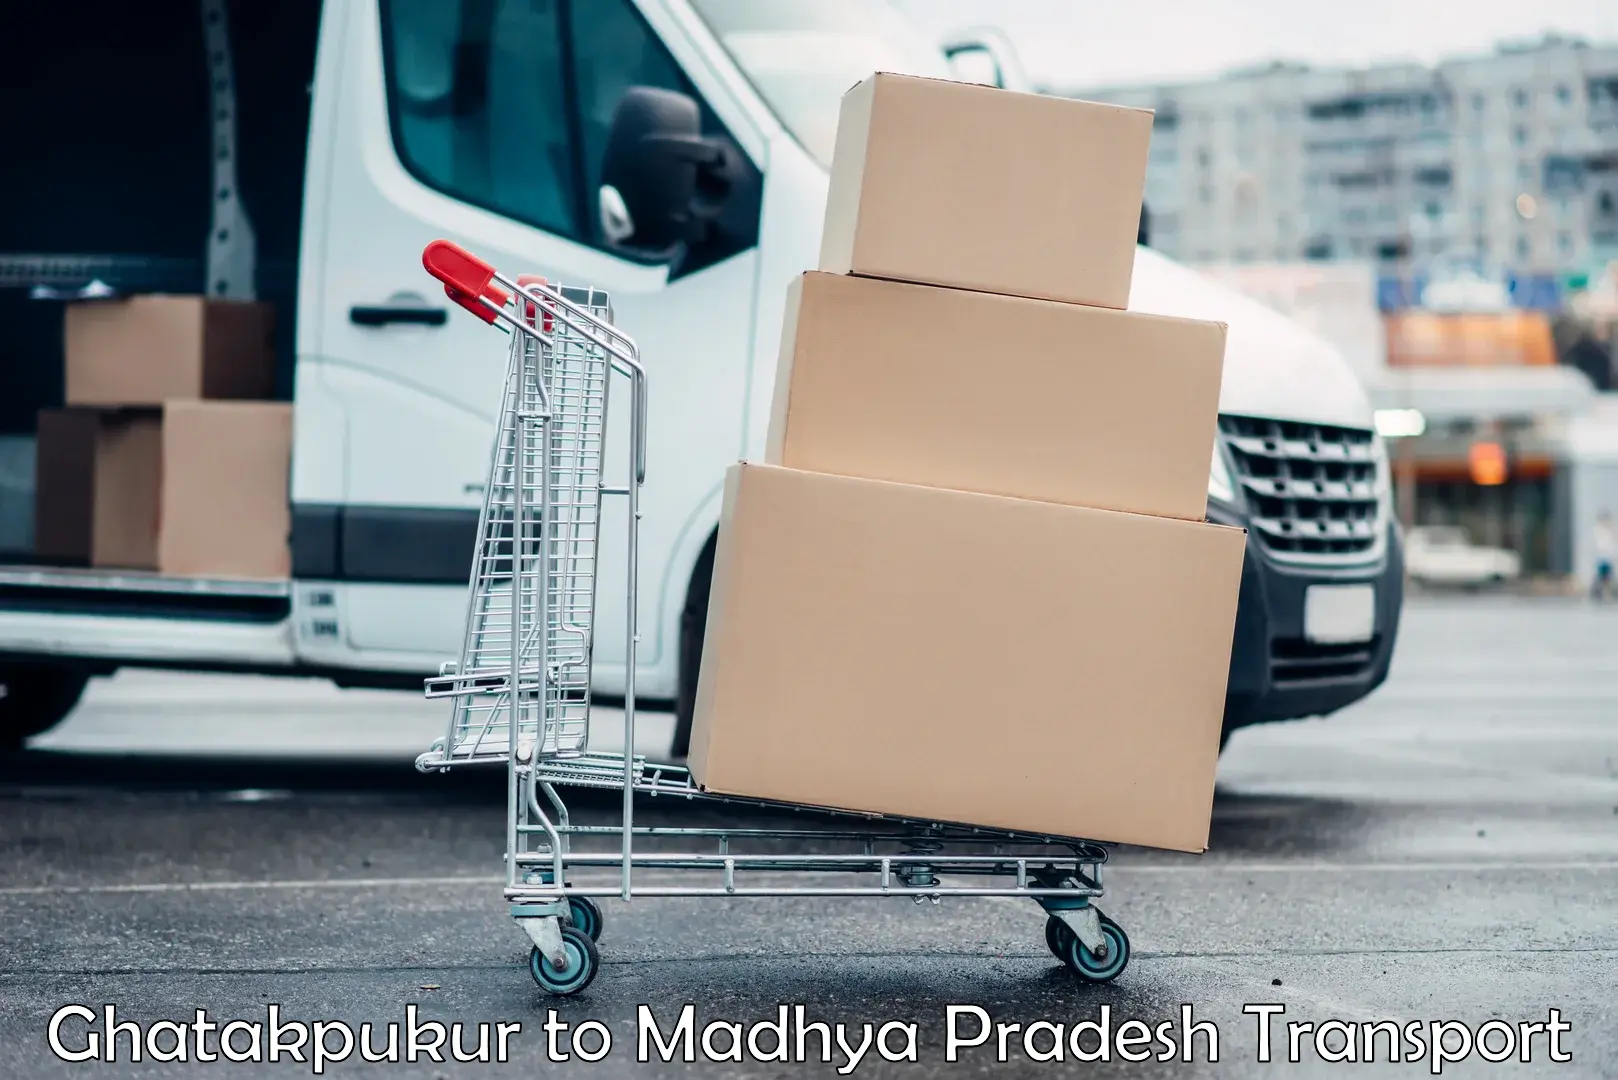 Vehicle courier services in Ghatakpukur to Tikamgarh